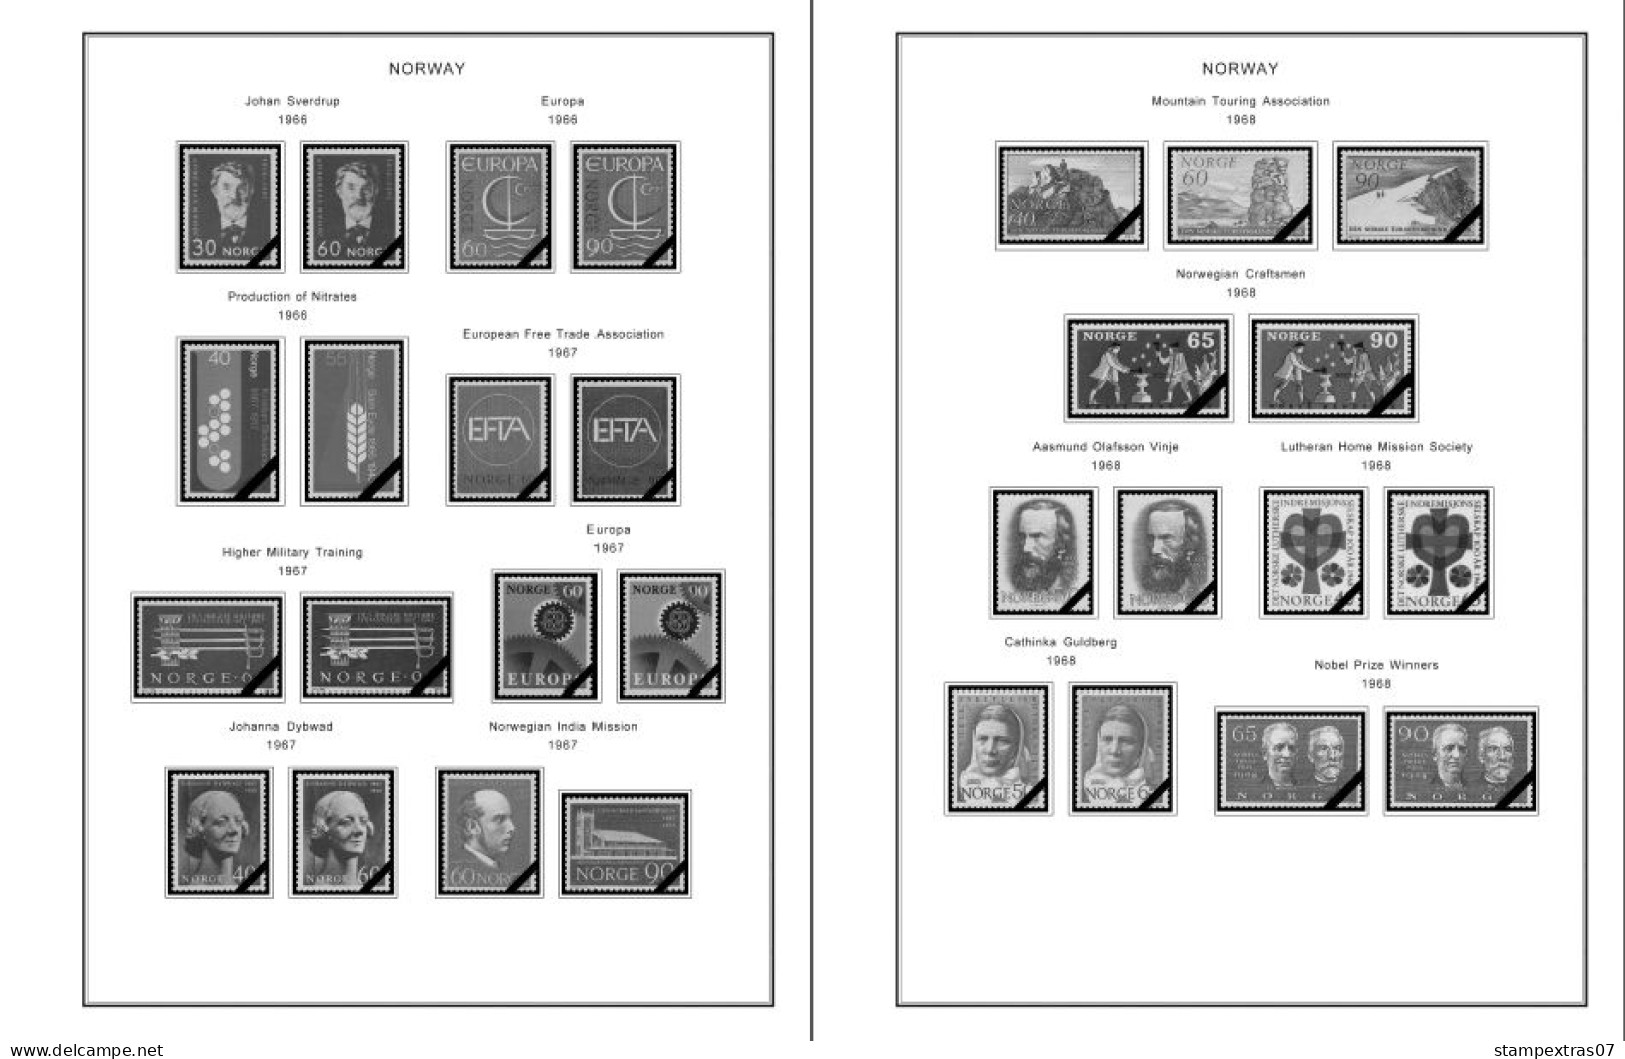 NORWAY 1855-2010 STAMP ALBUM PAGES (183 b&w illustrated pages)